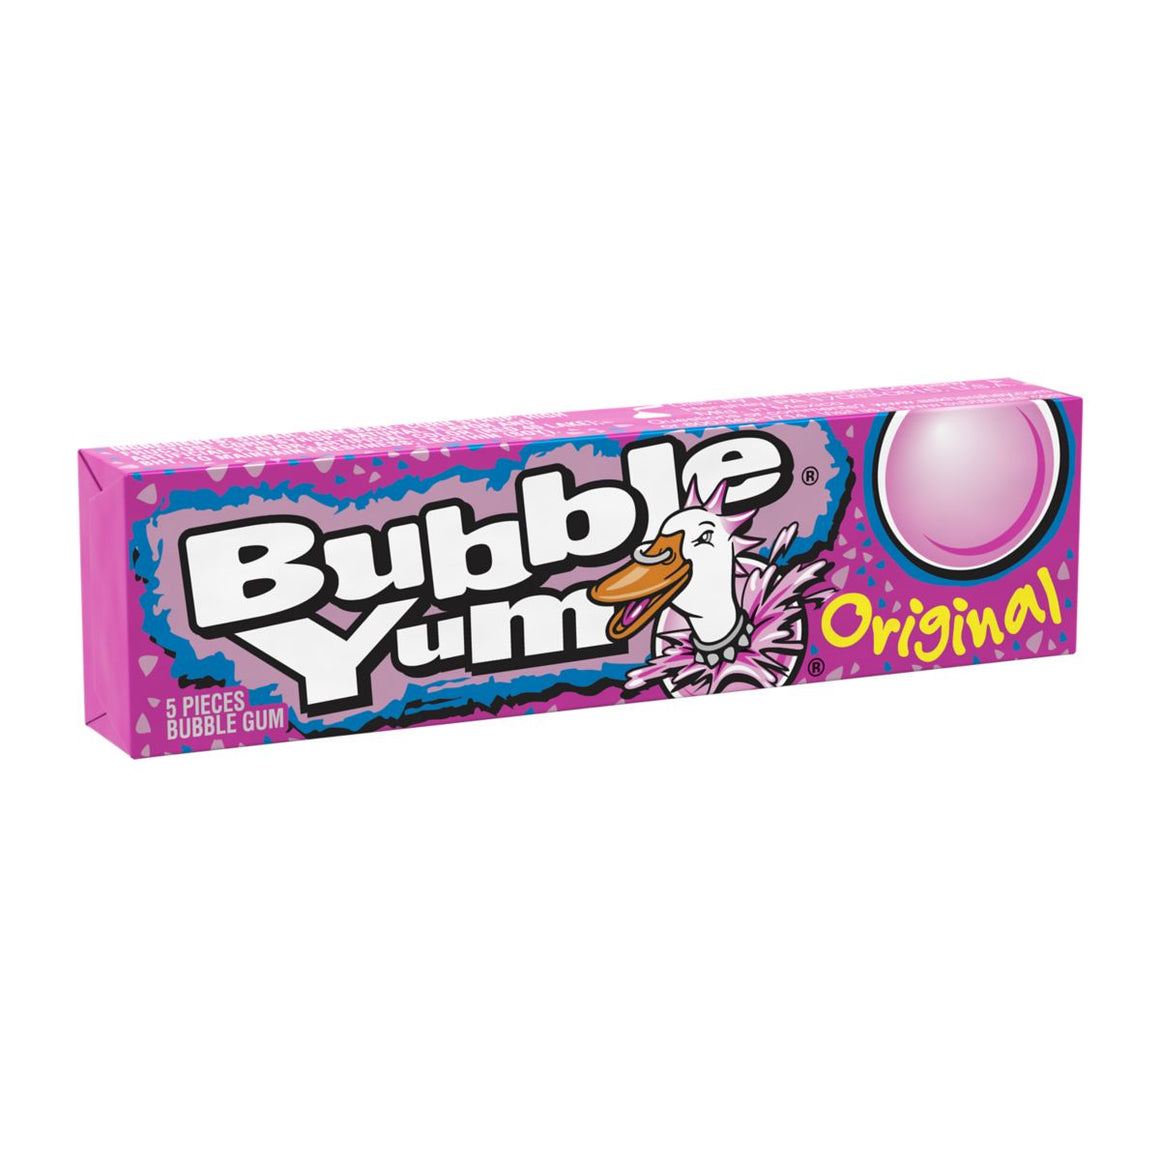 All City Candy Bubble Yum Original Bubble Gum - 5-Piece Pack Gum/Bubble Gum Hershey's 1 Pack For fresh candy and great service, visit www.allcitycandy.com